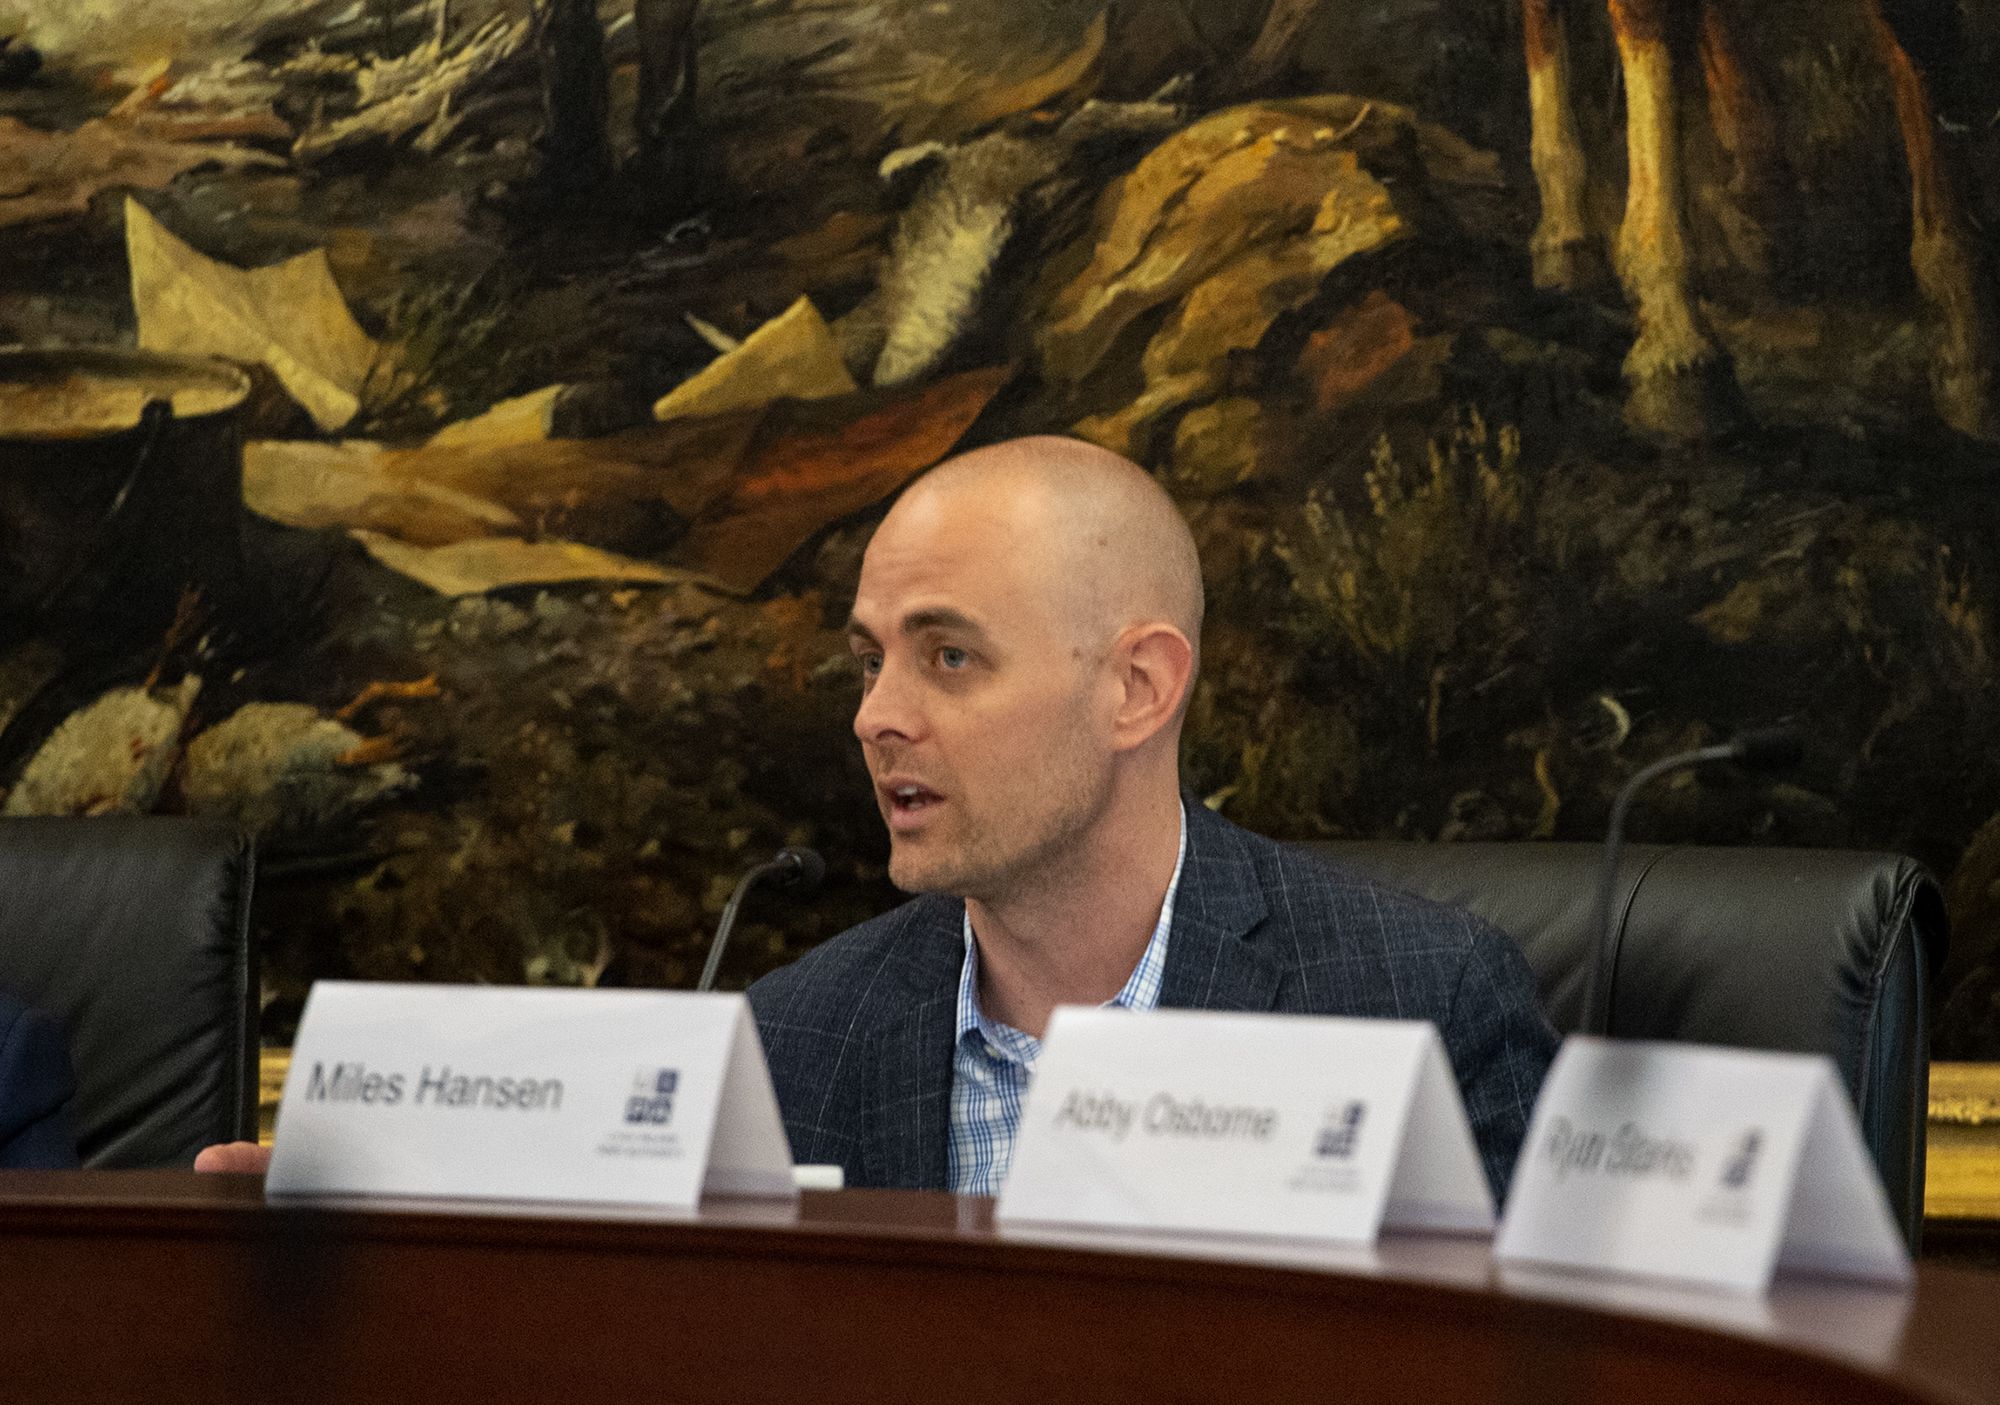 (Chris Samuels | The Salt Lake Tribune) Chair Miles Hansen opens a meeting of the Utah Inland Port Authority board at the State Capitol, Thursday, May 11, 2023.